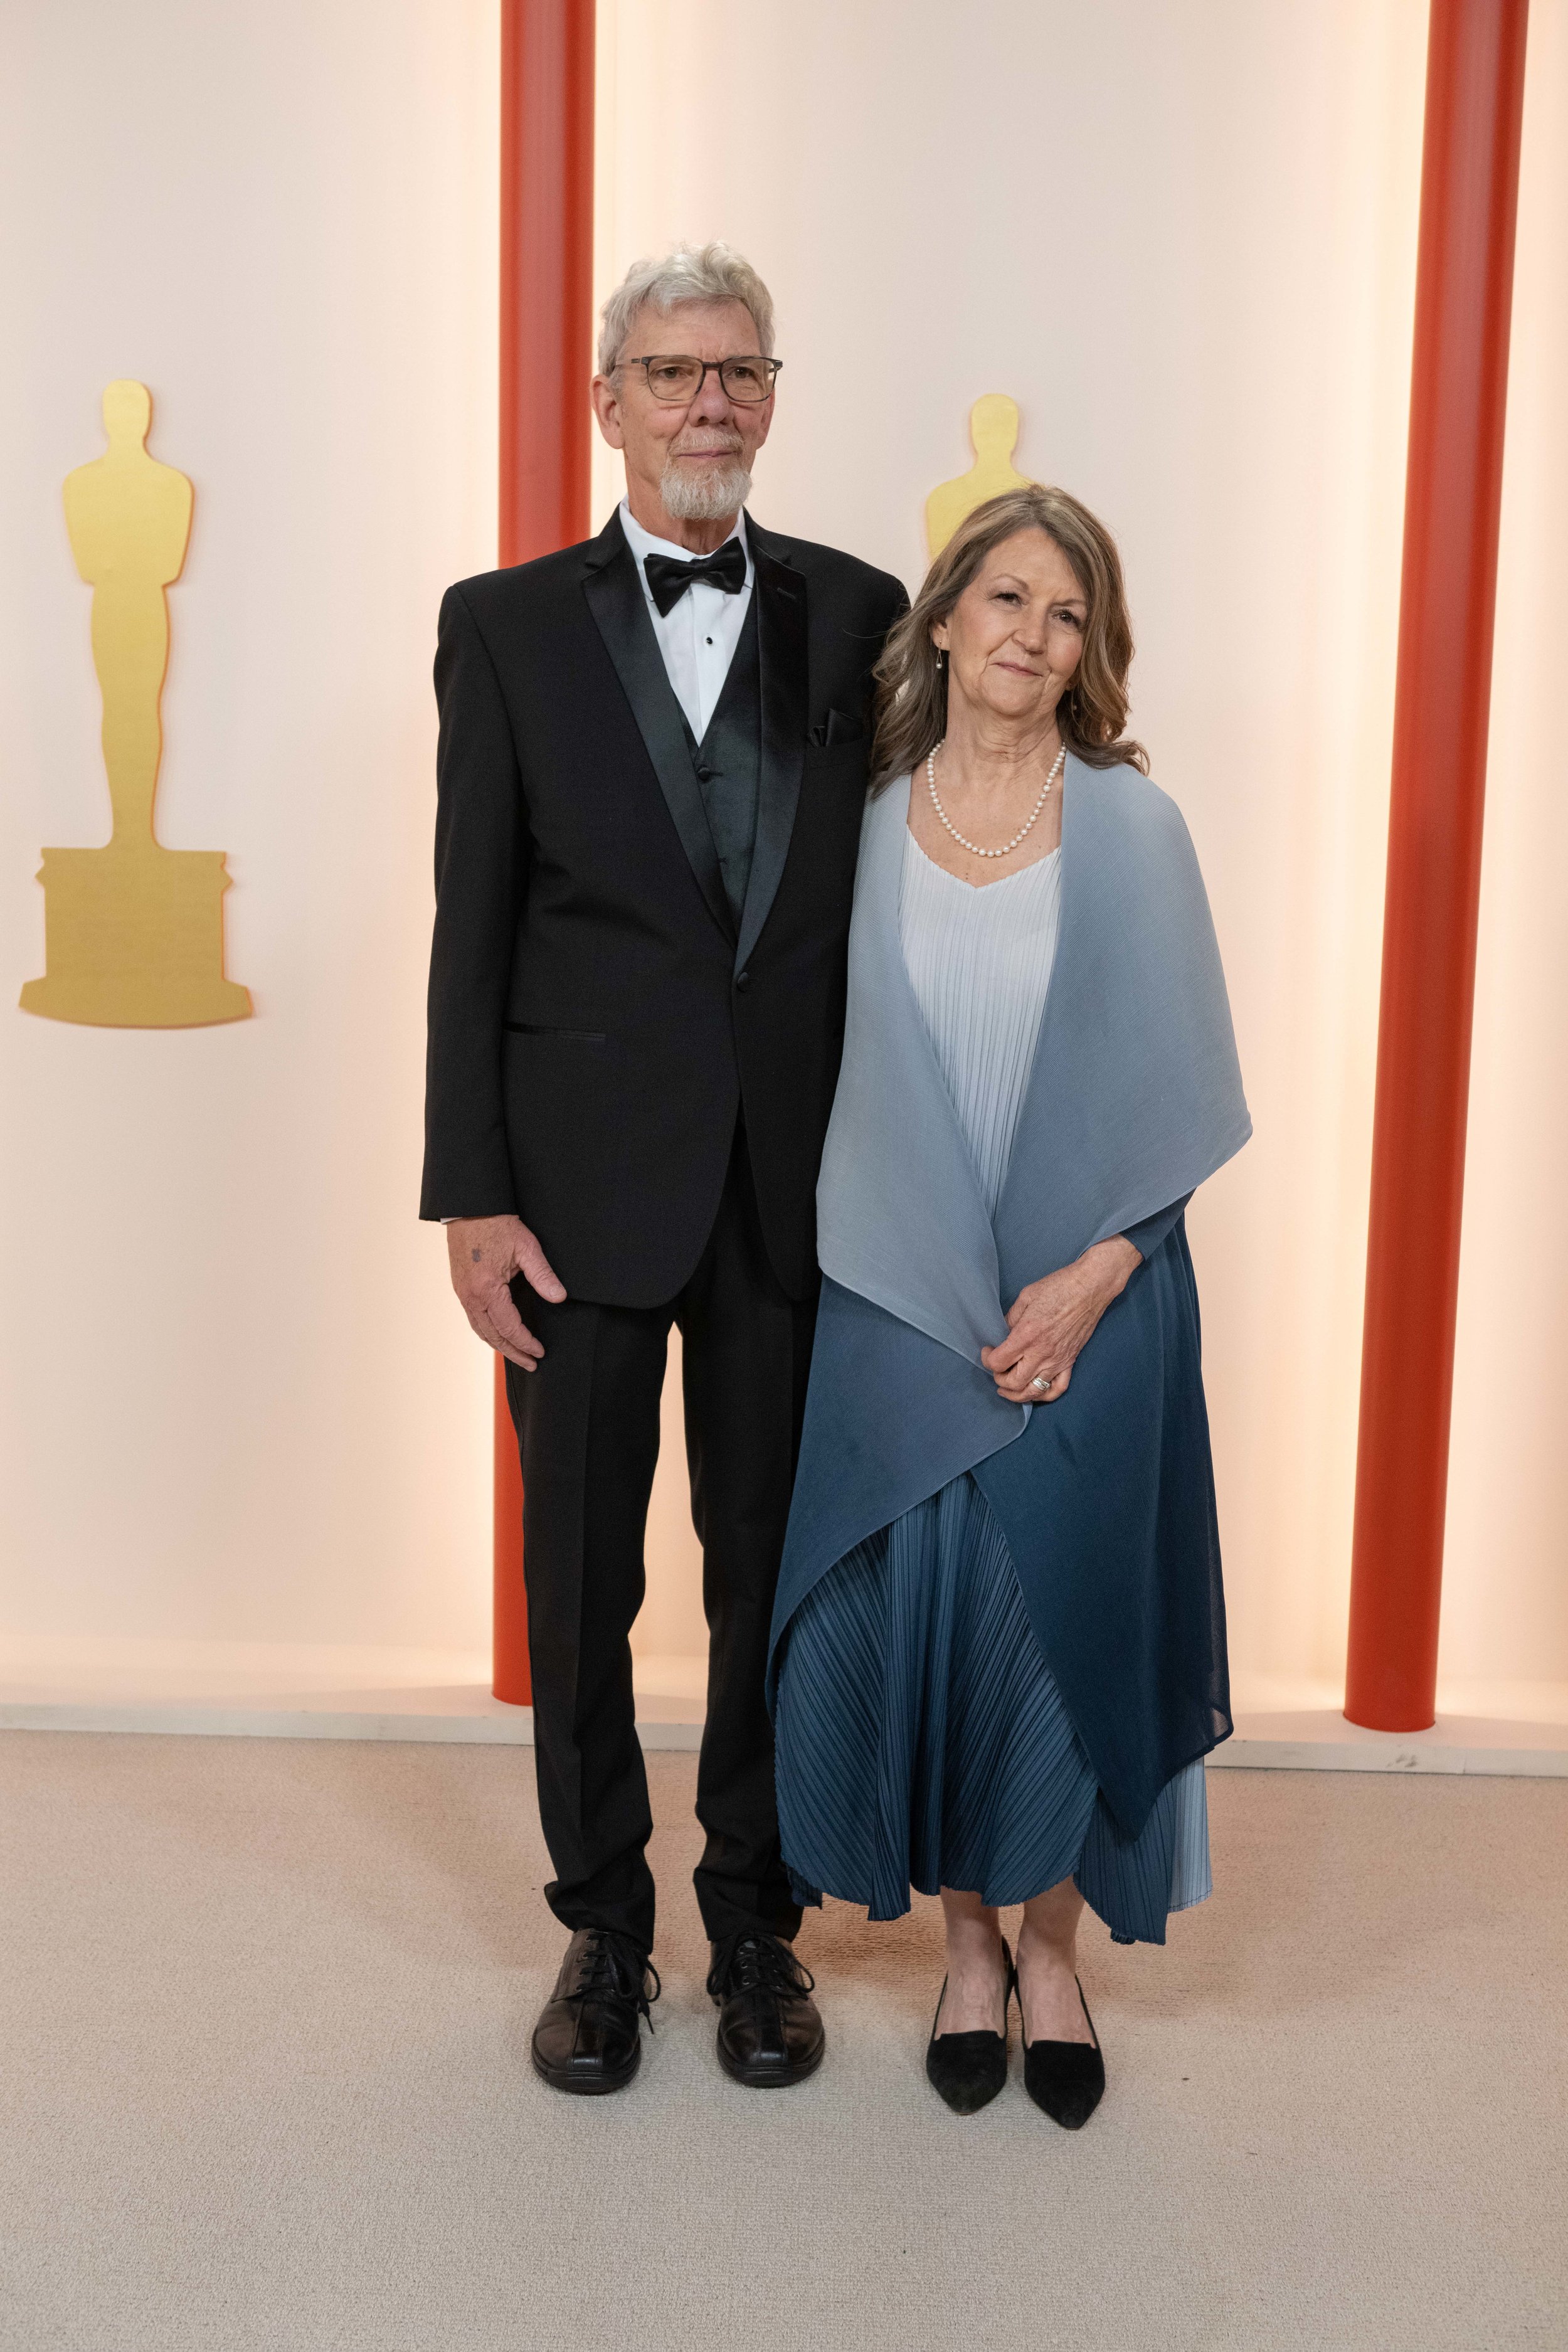 Rick Carter and Oscar® nominee Karen O’Hara arrives on the red carpet of the 95th Oscars